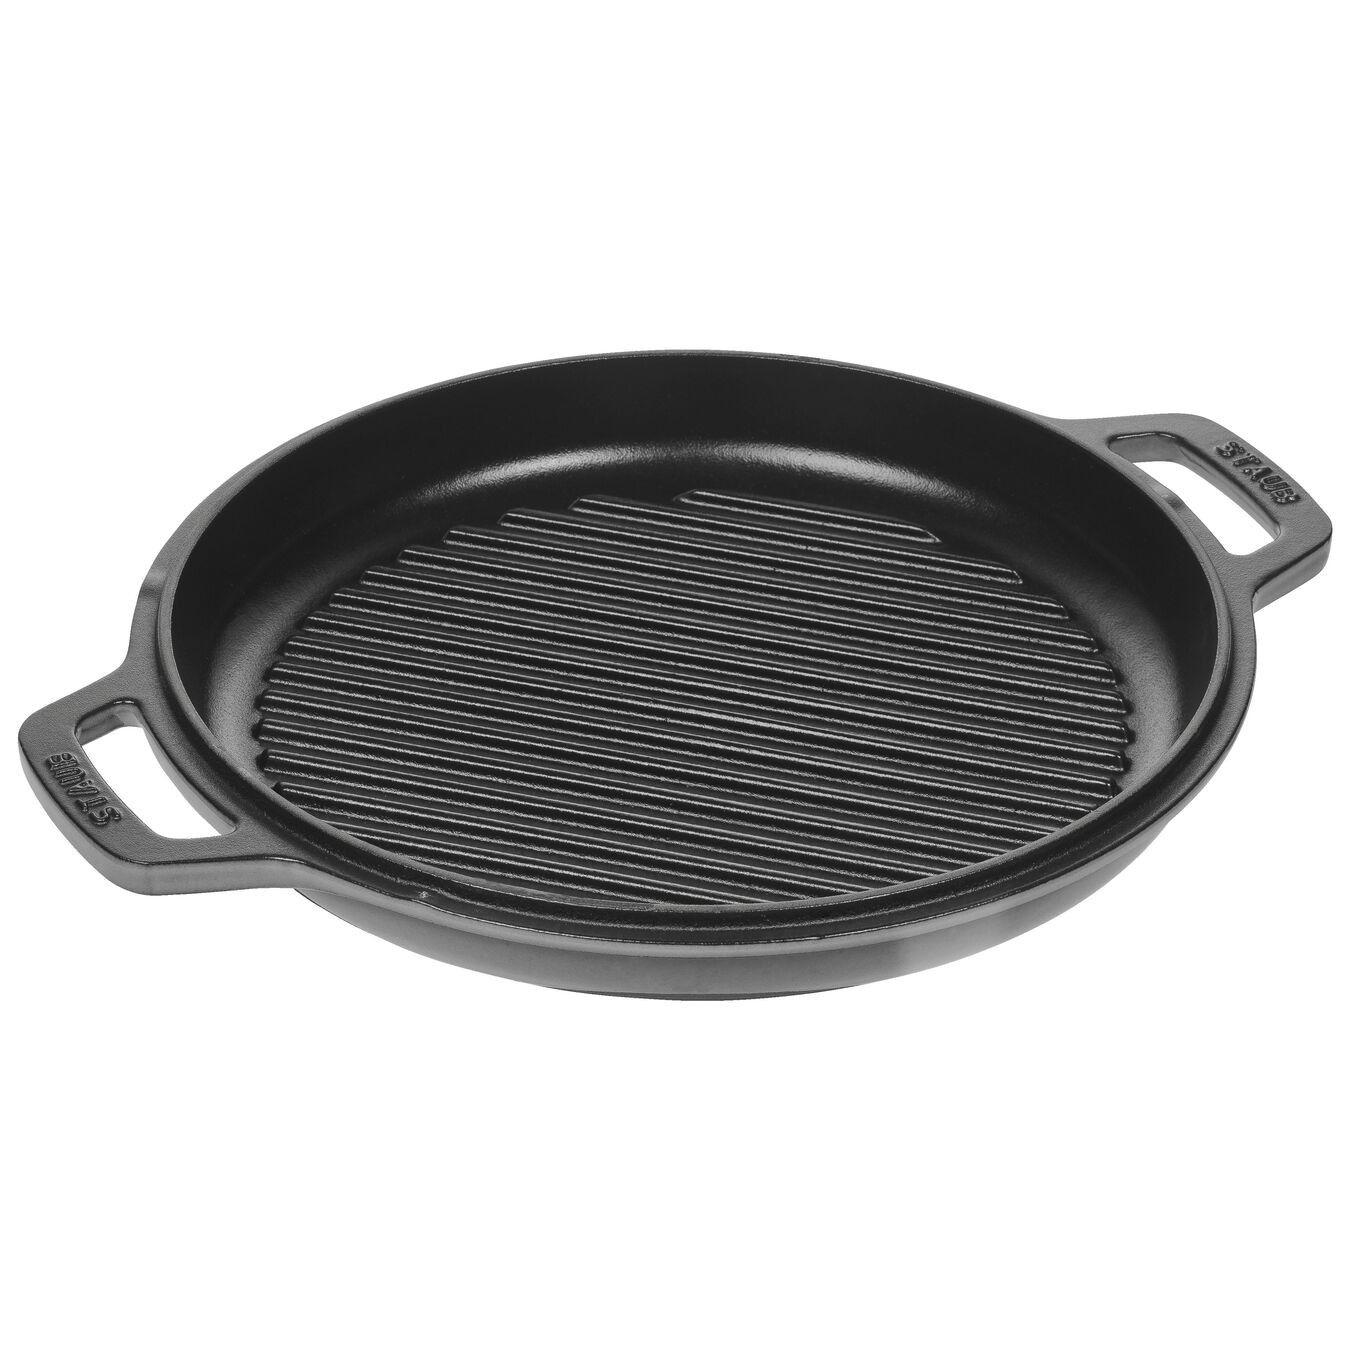 3.5 qt, Braise + grill, graphite grey - Visual Imperfections,,large 3